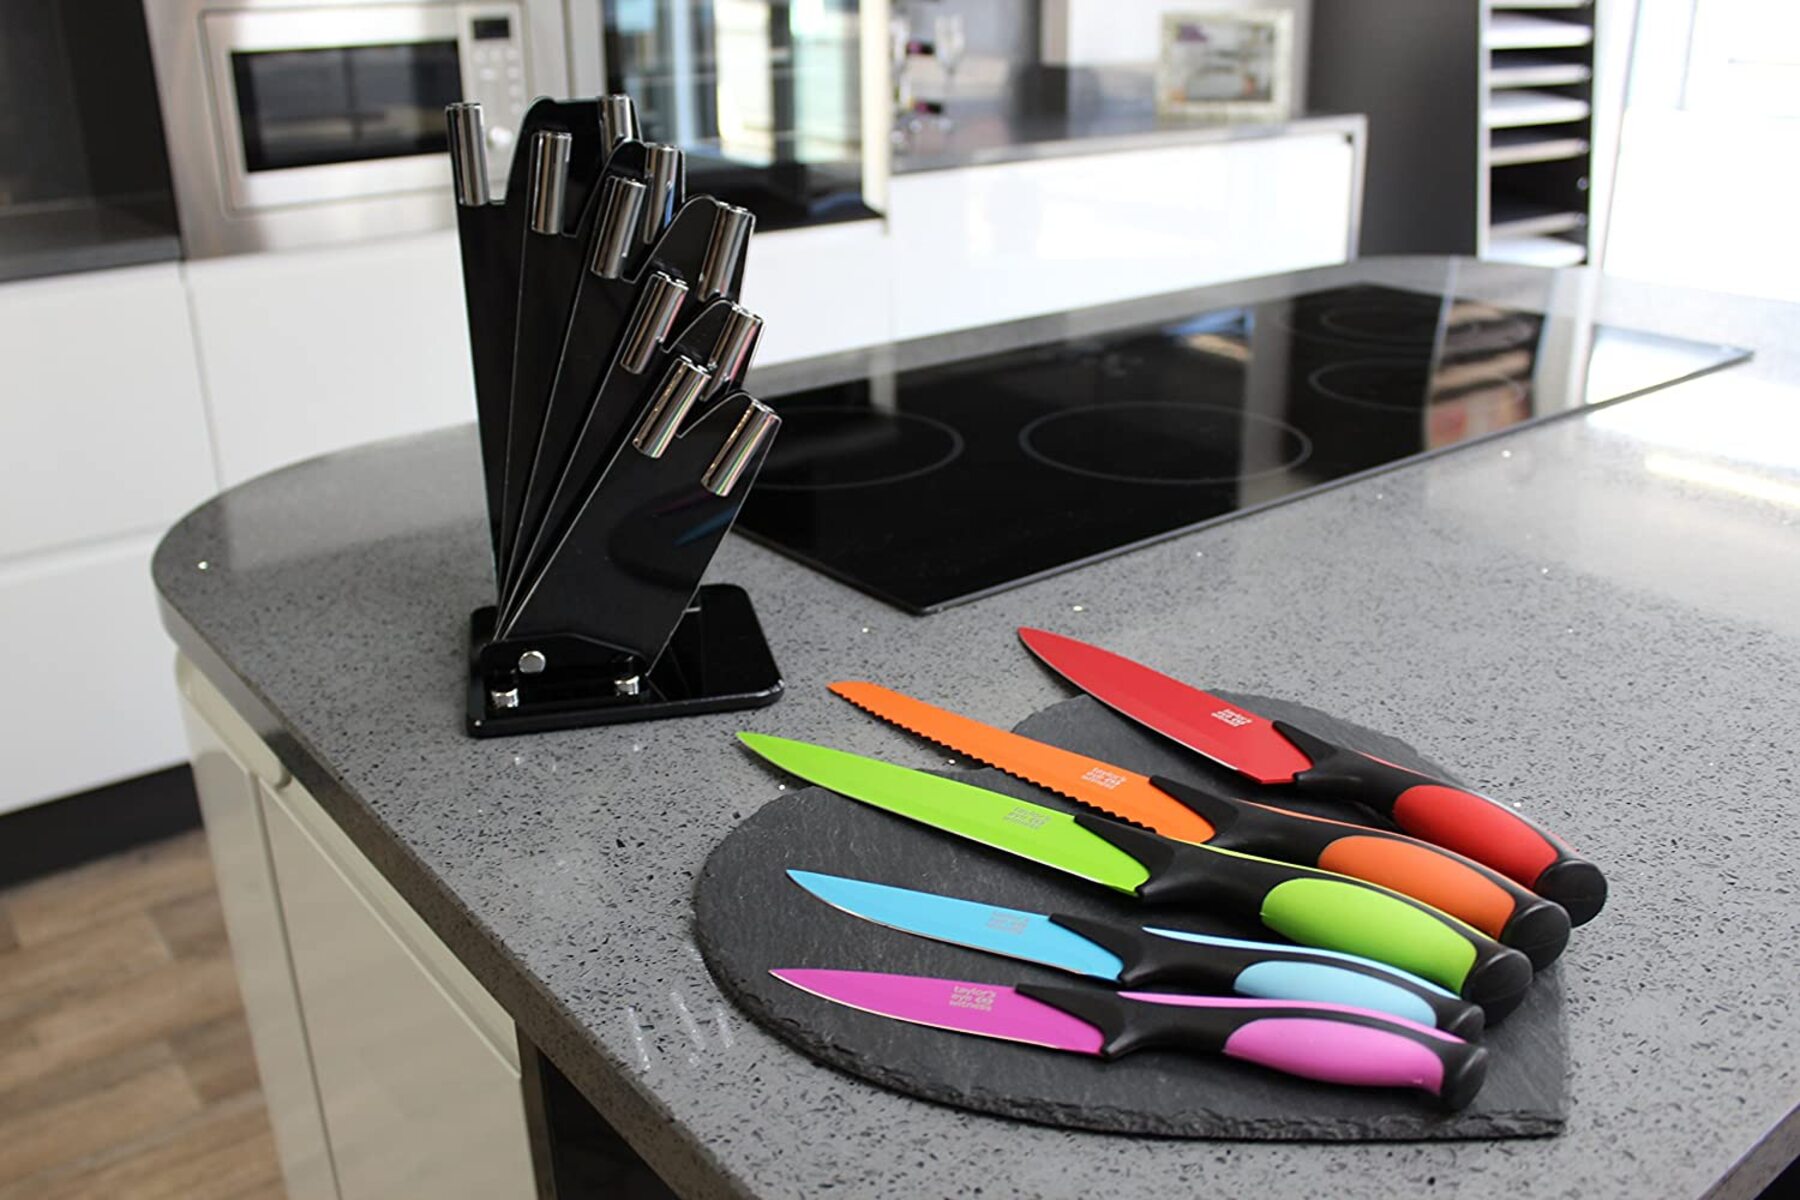 Top Quality 5pcs PP Handle With Acrylic Stand Coating Non-stick Color  Kitchen Knife Set - Buy Top Quality 5pcs PP Handle With Acrylic Stand  Coating Non-stick Color Kitchen Knife Set Product on